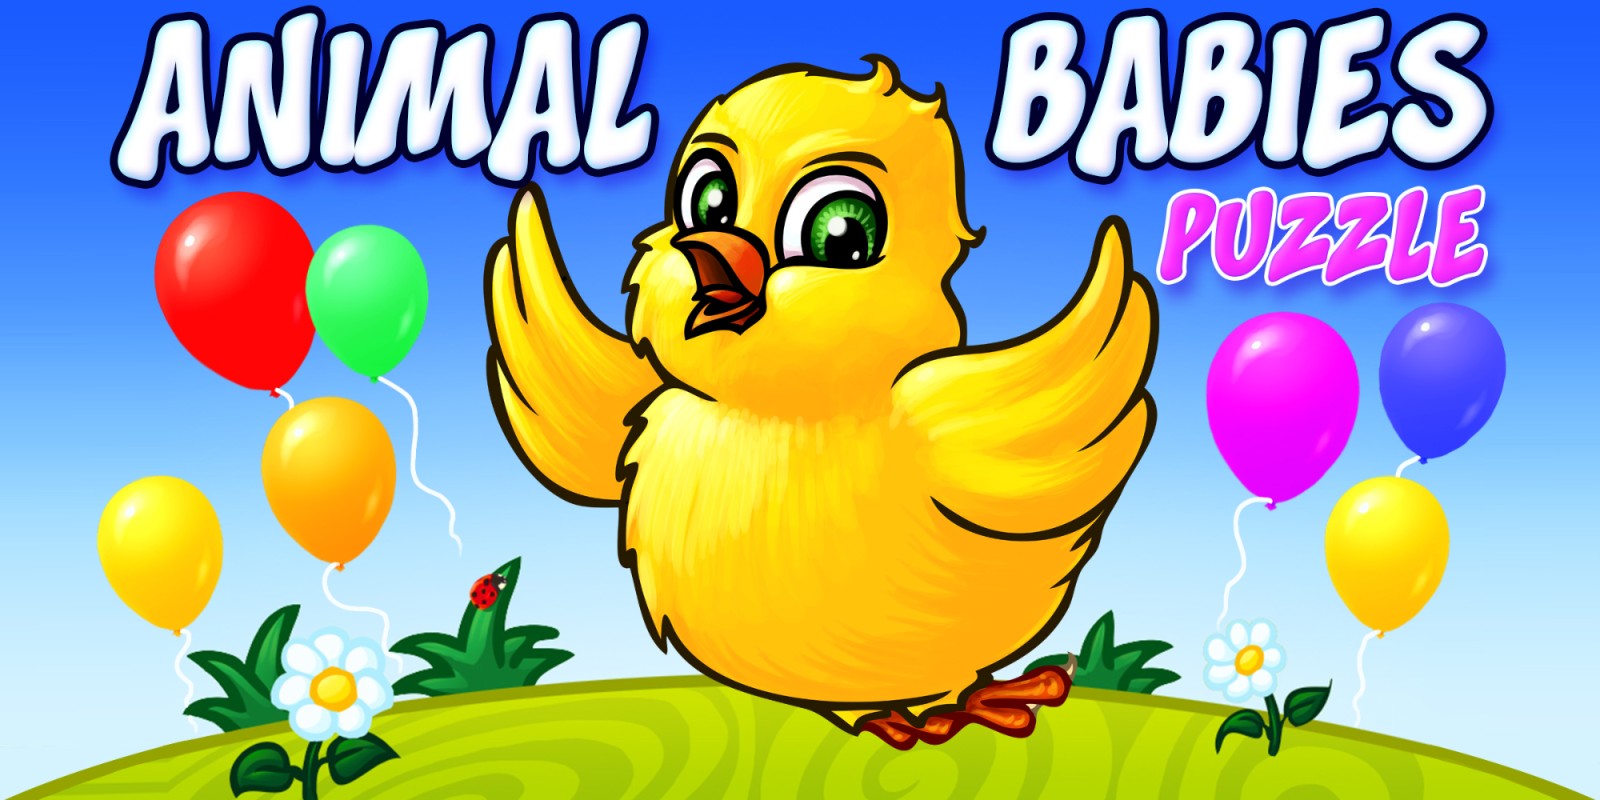 Animal Babies Puzzle - Preschool Animals Puzzles Game for Kids | Nintendo  Switch download software | Games | Nintendo